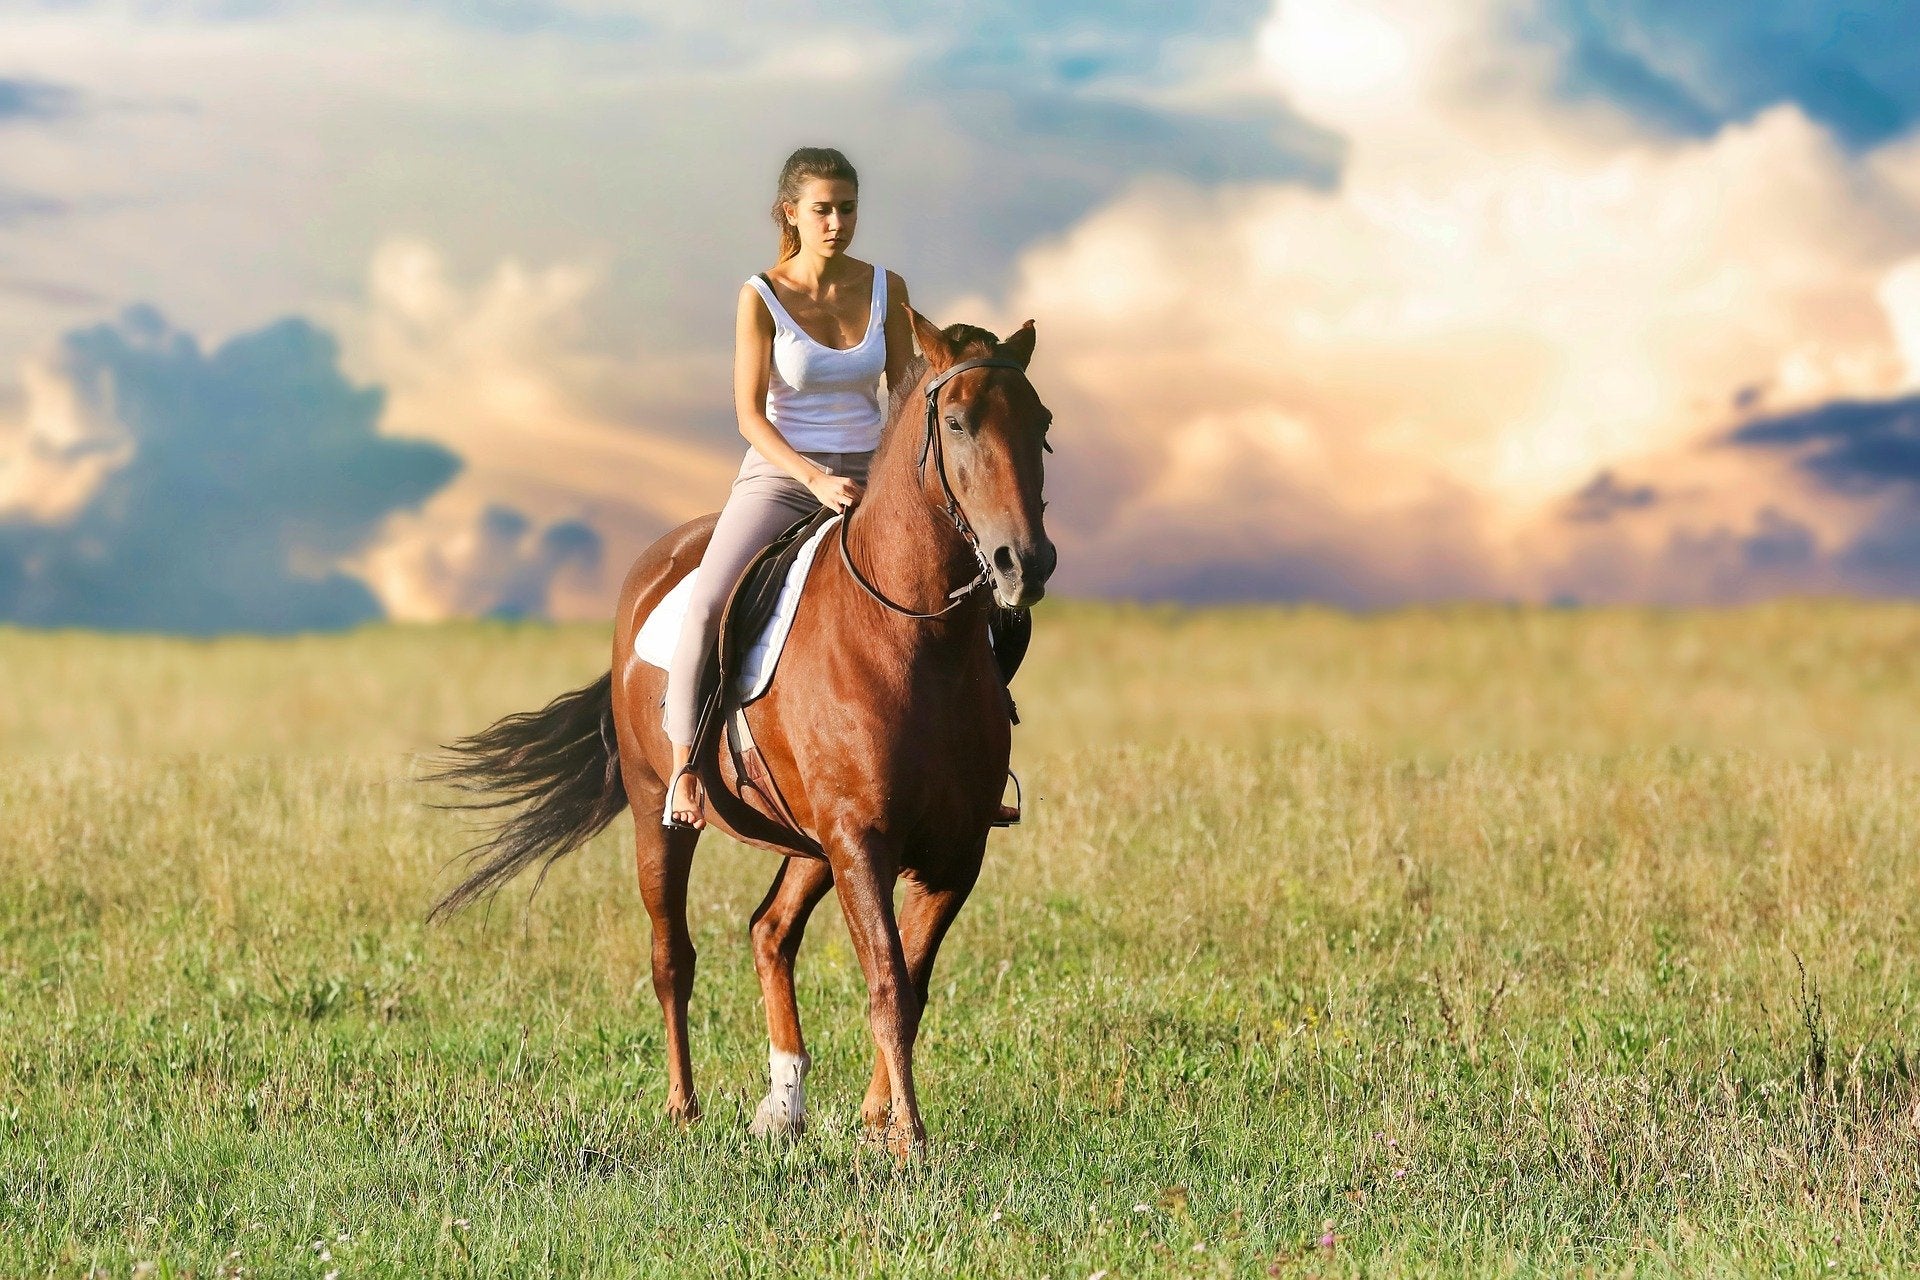 Woman on her horse through a field with blue sky